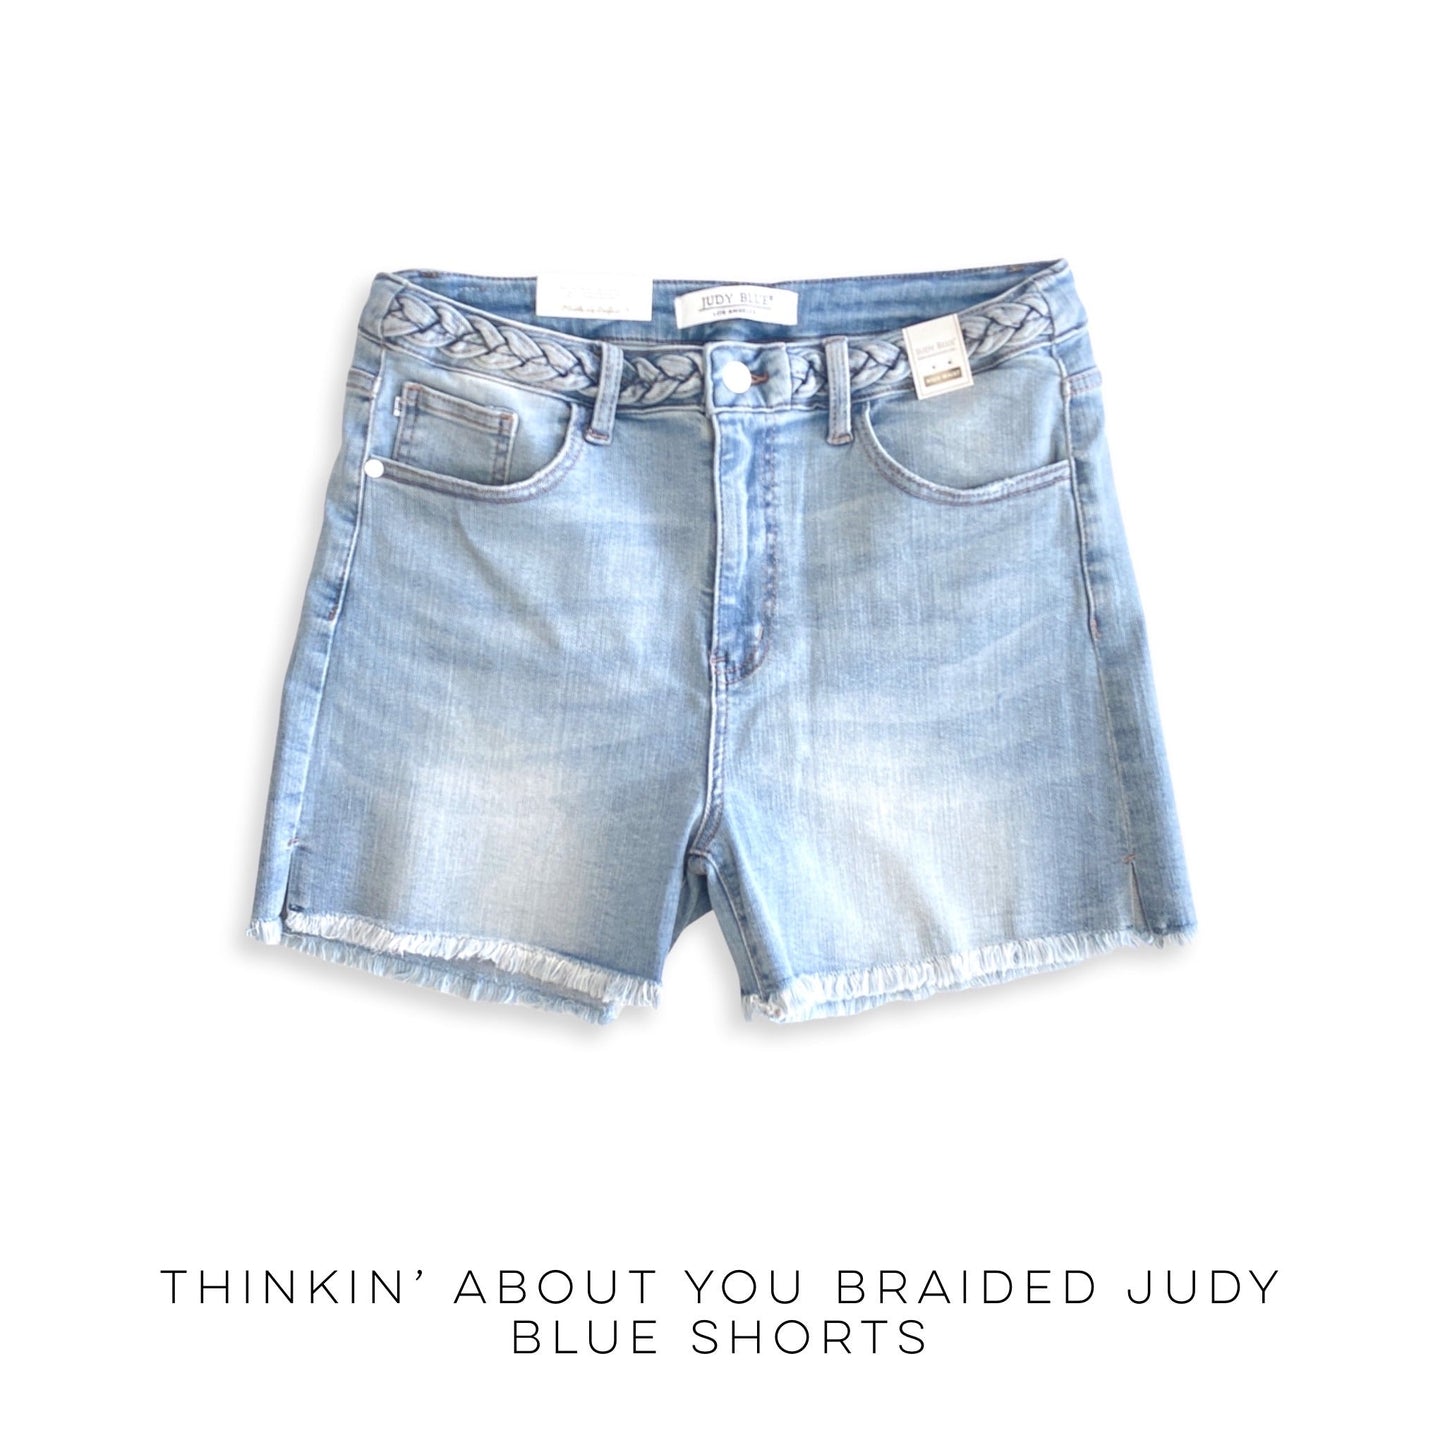 Thinkin' About You Braided Judy Blue Shorts